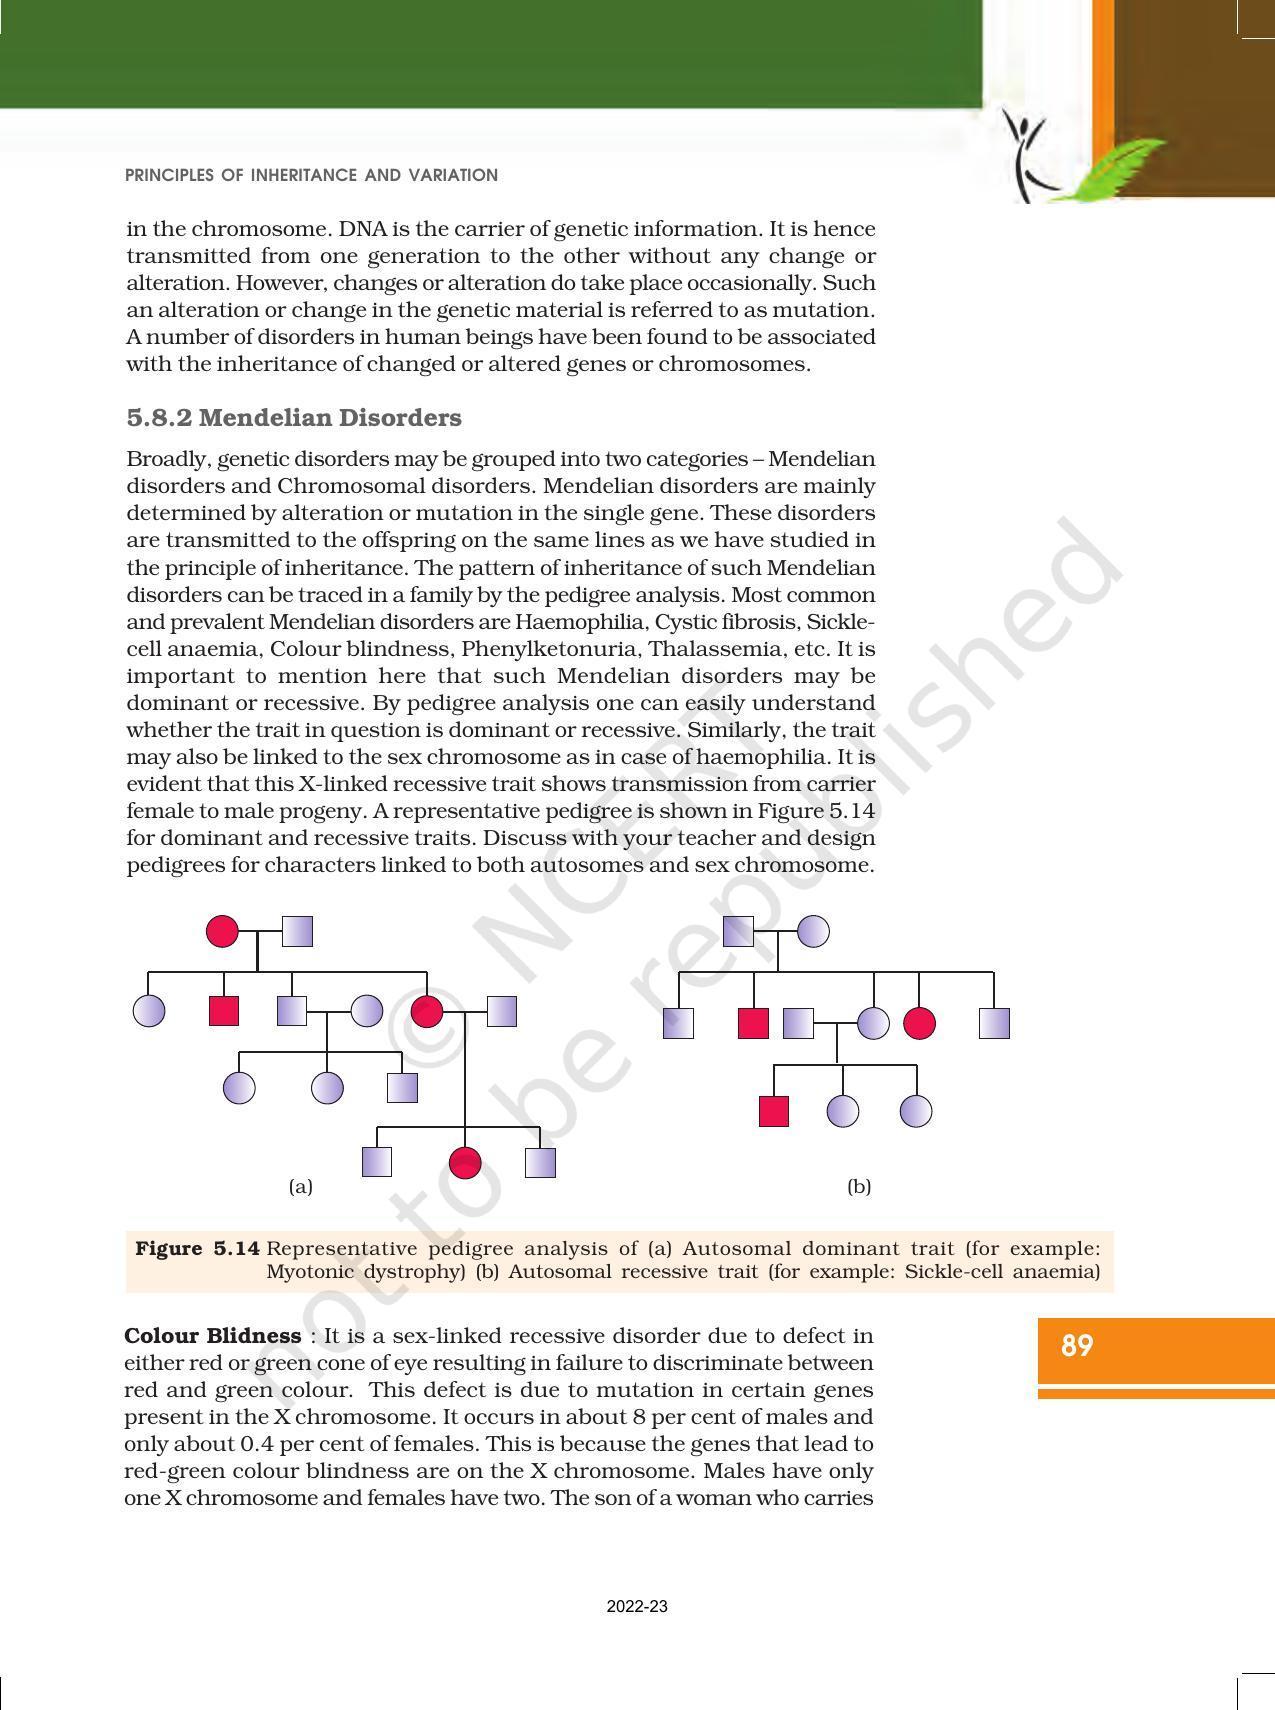 NCERT Book for Class 12 Biology Chapter 5 Principles of Inheritance and Variation - Page 23